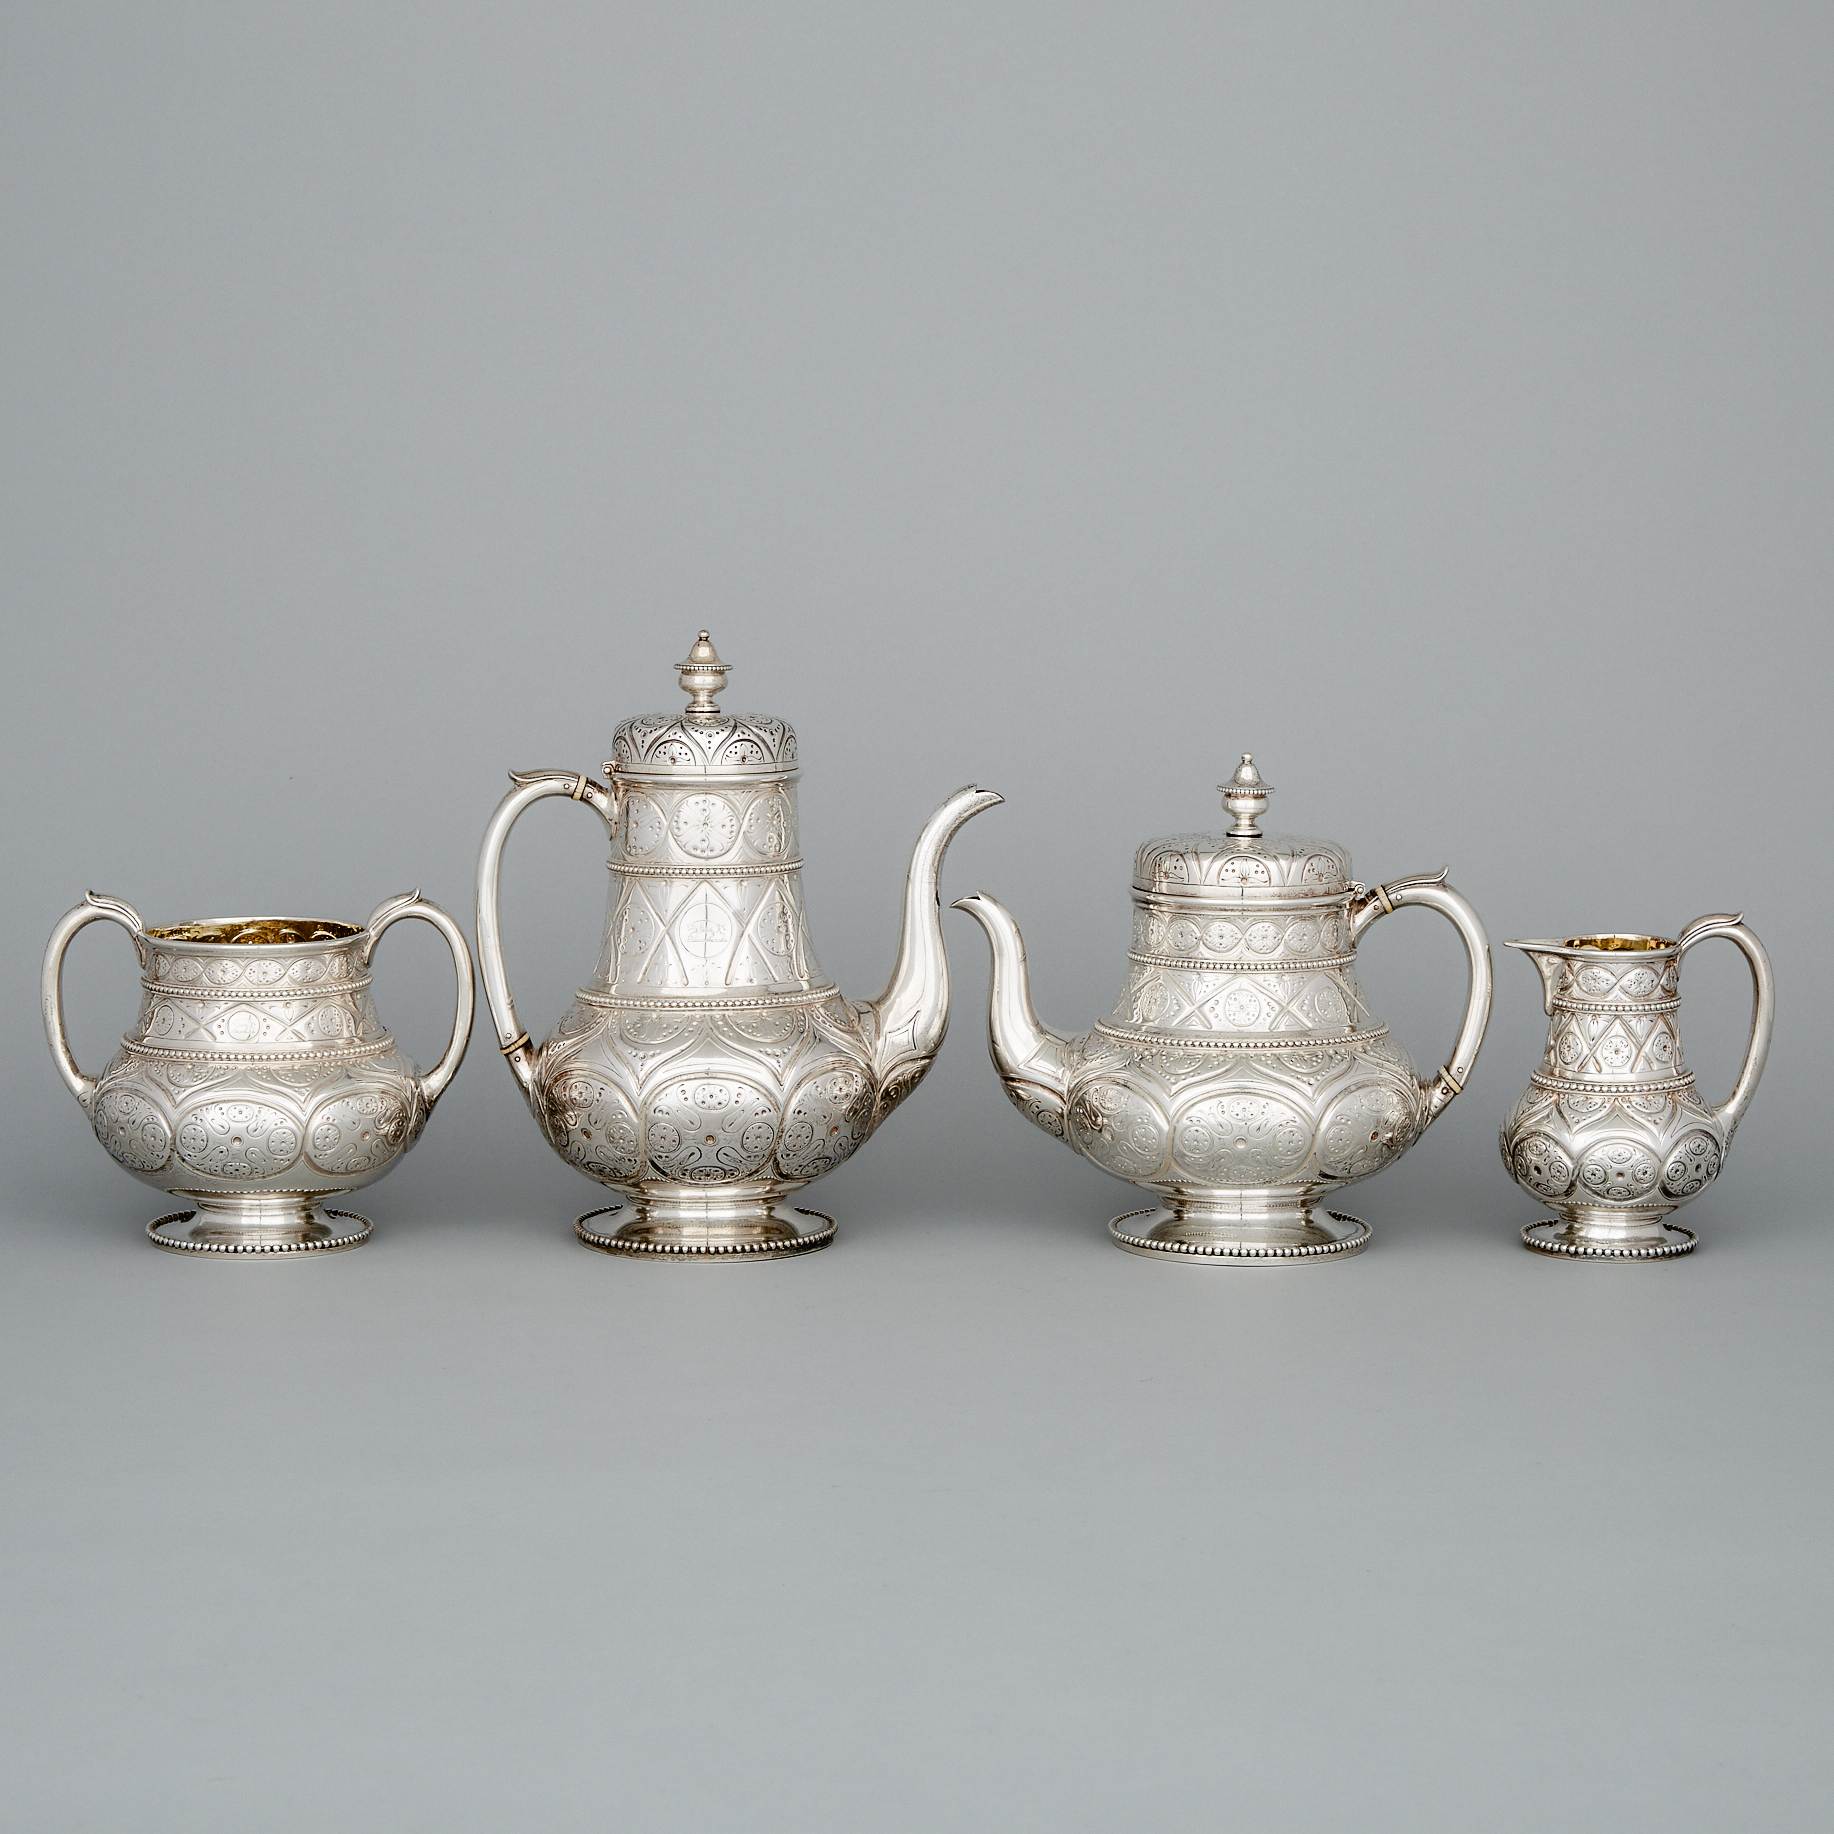 Victorian Silver Tea and Coffee Service, John Samuel Hunt for Hunt & Roskell, London, 1863